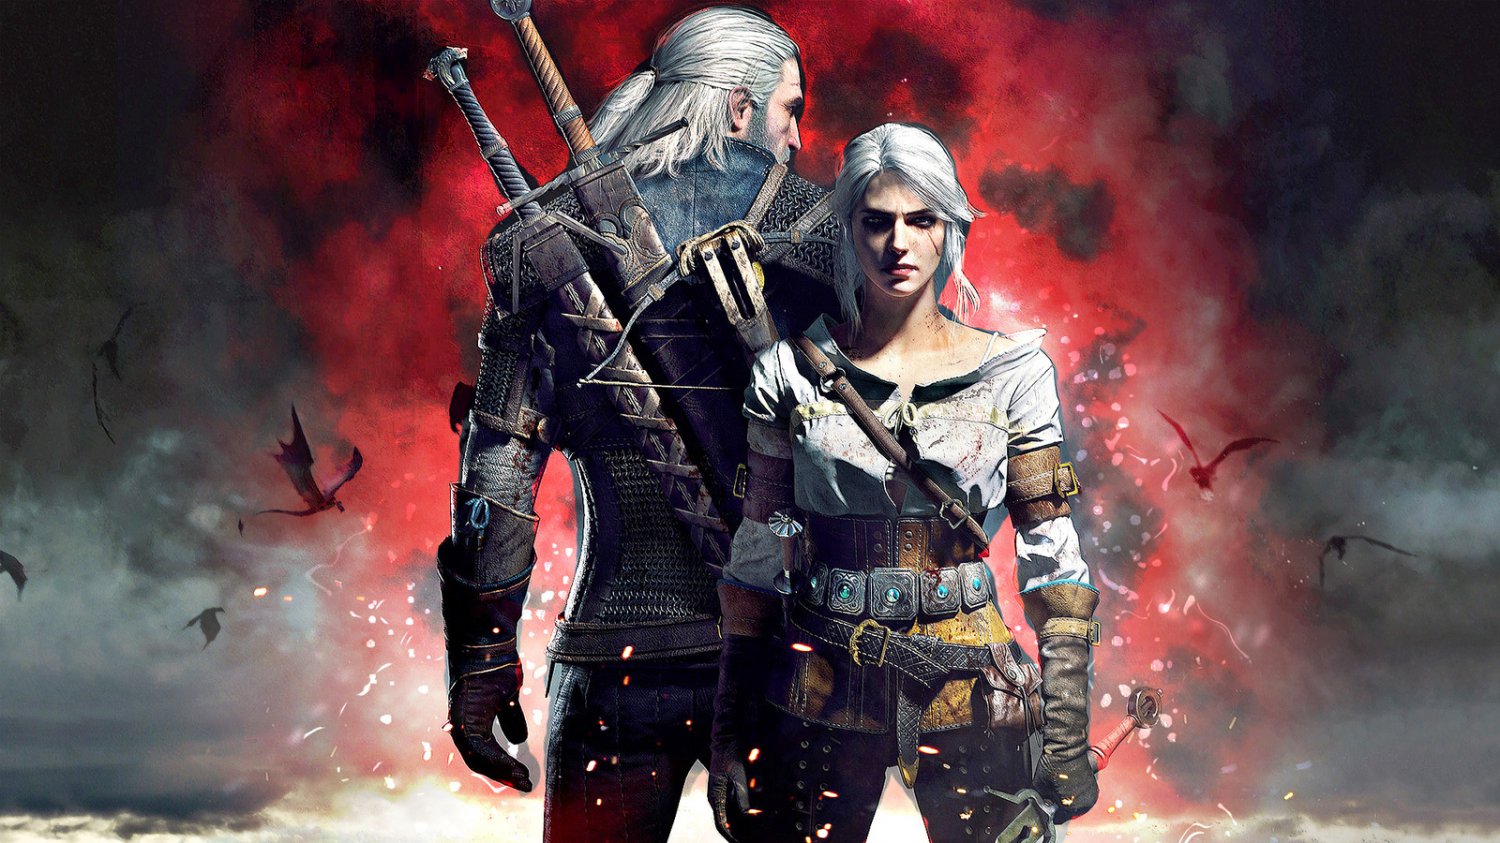 The Witcher 3 Wild Hunt Game 18"x28" (45cm/70cm) Poster.